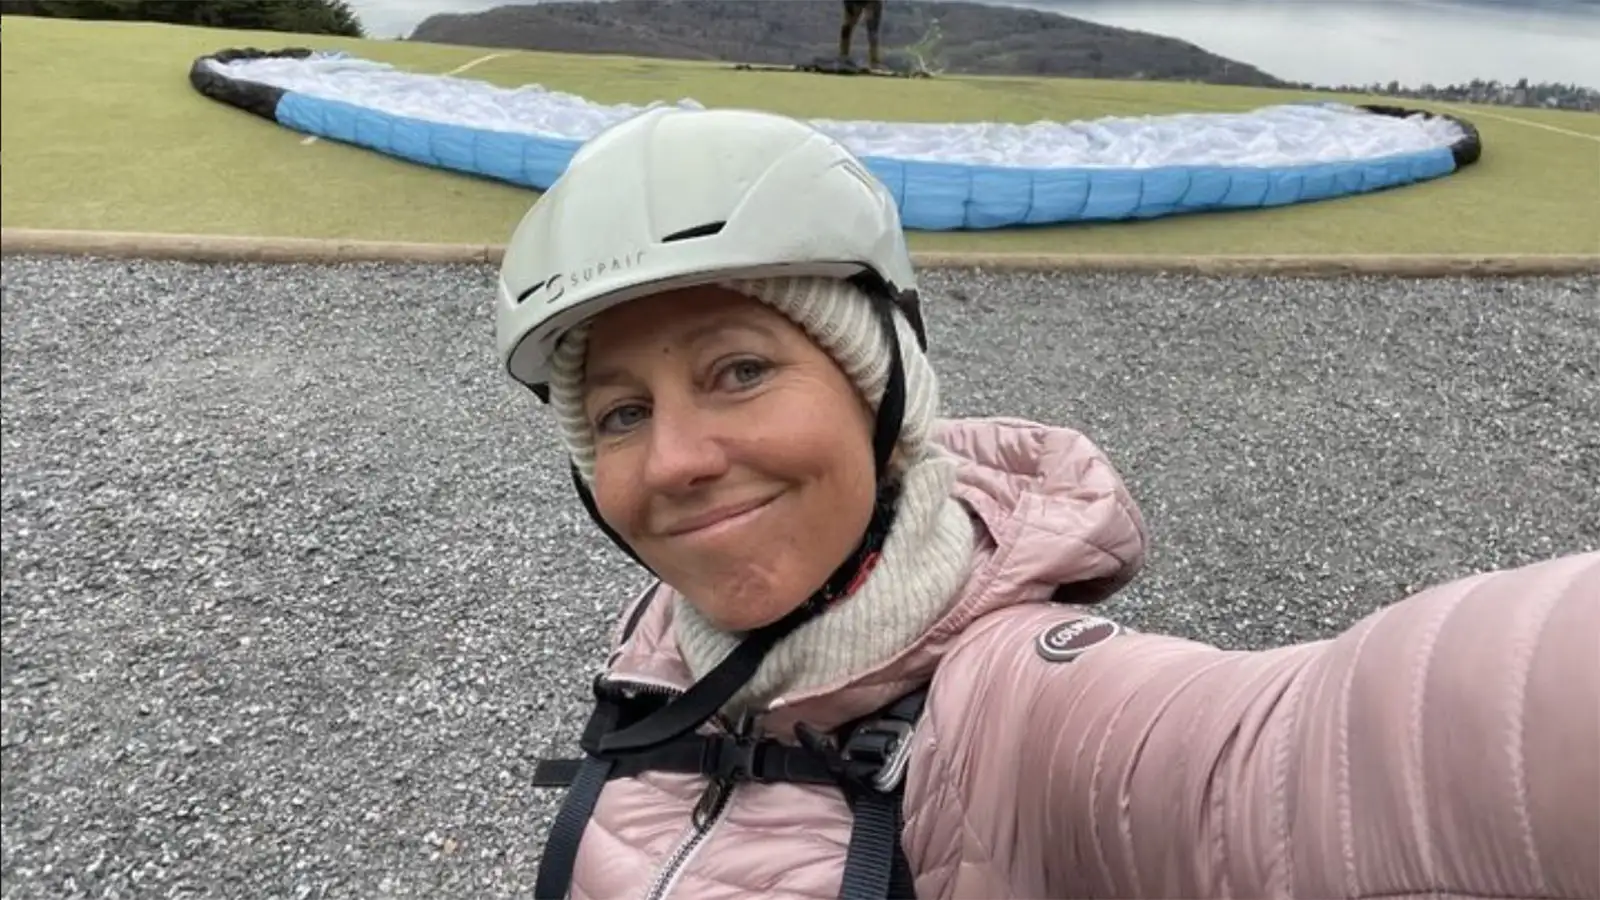 Angela Cullen goes paragliding. March 2023